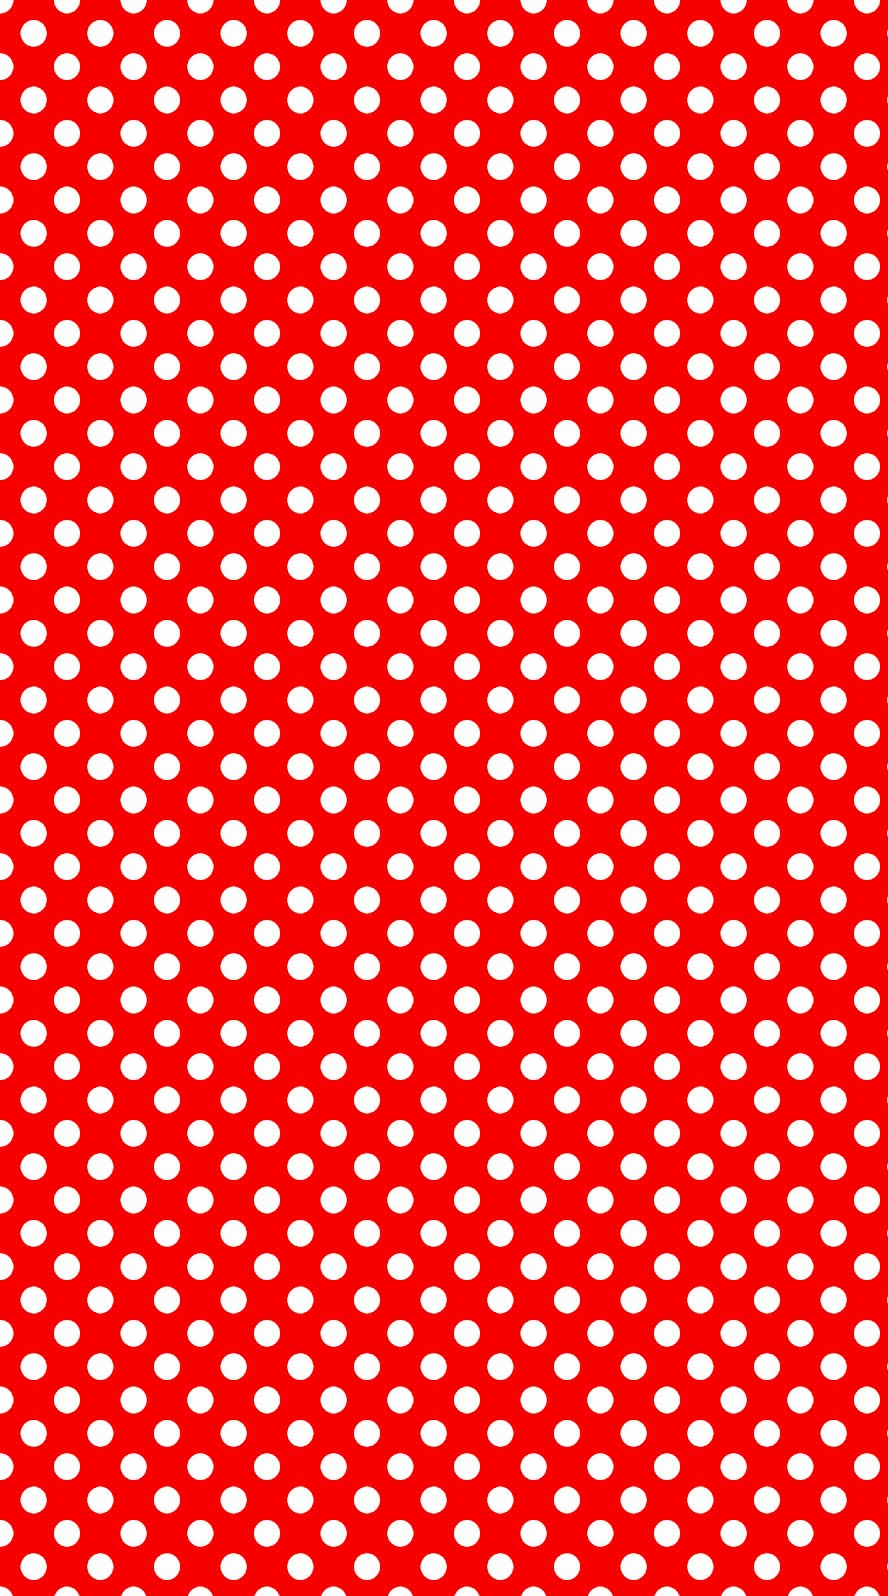 Red And White Polka Dot Background By Stampmakerlkj